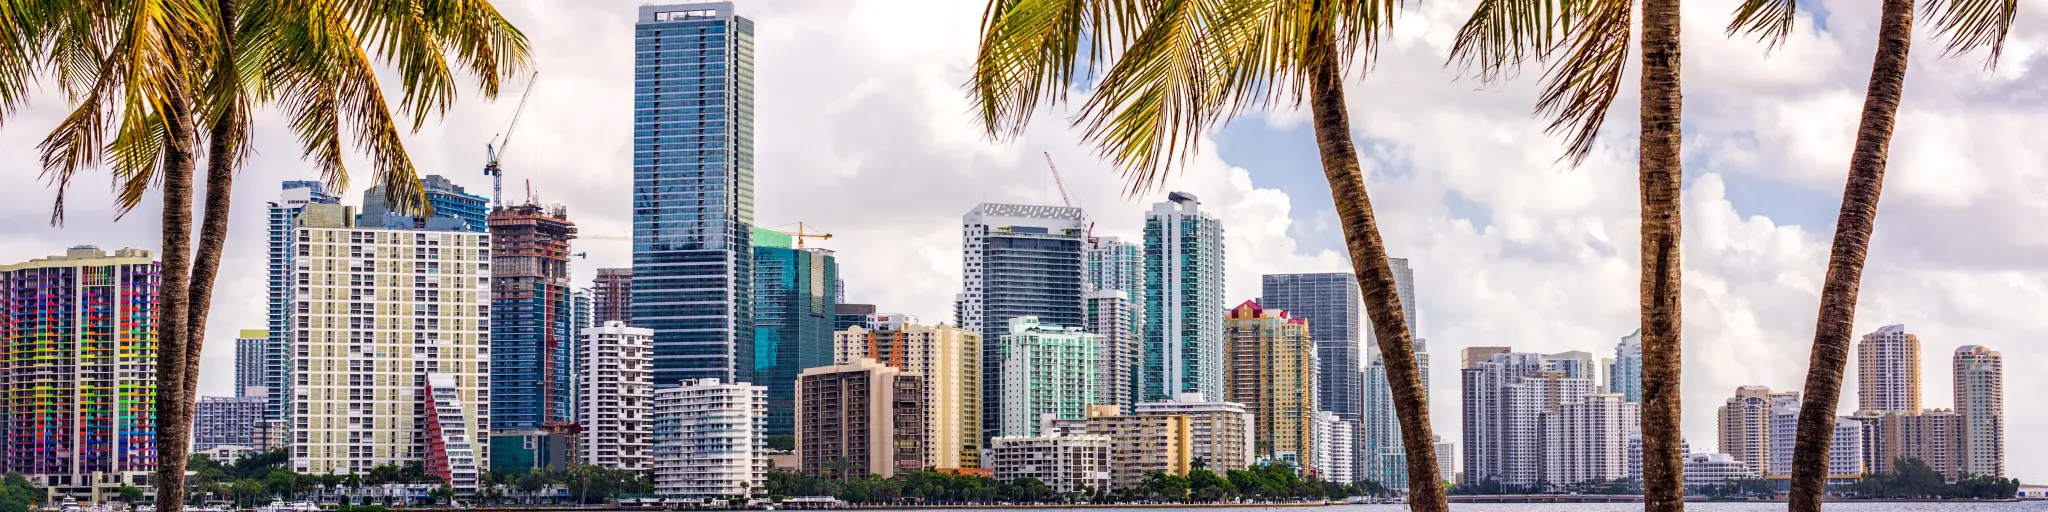 Downtown skyline of Miami with palm trees in the foreground on a partially cloudy day